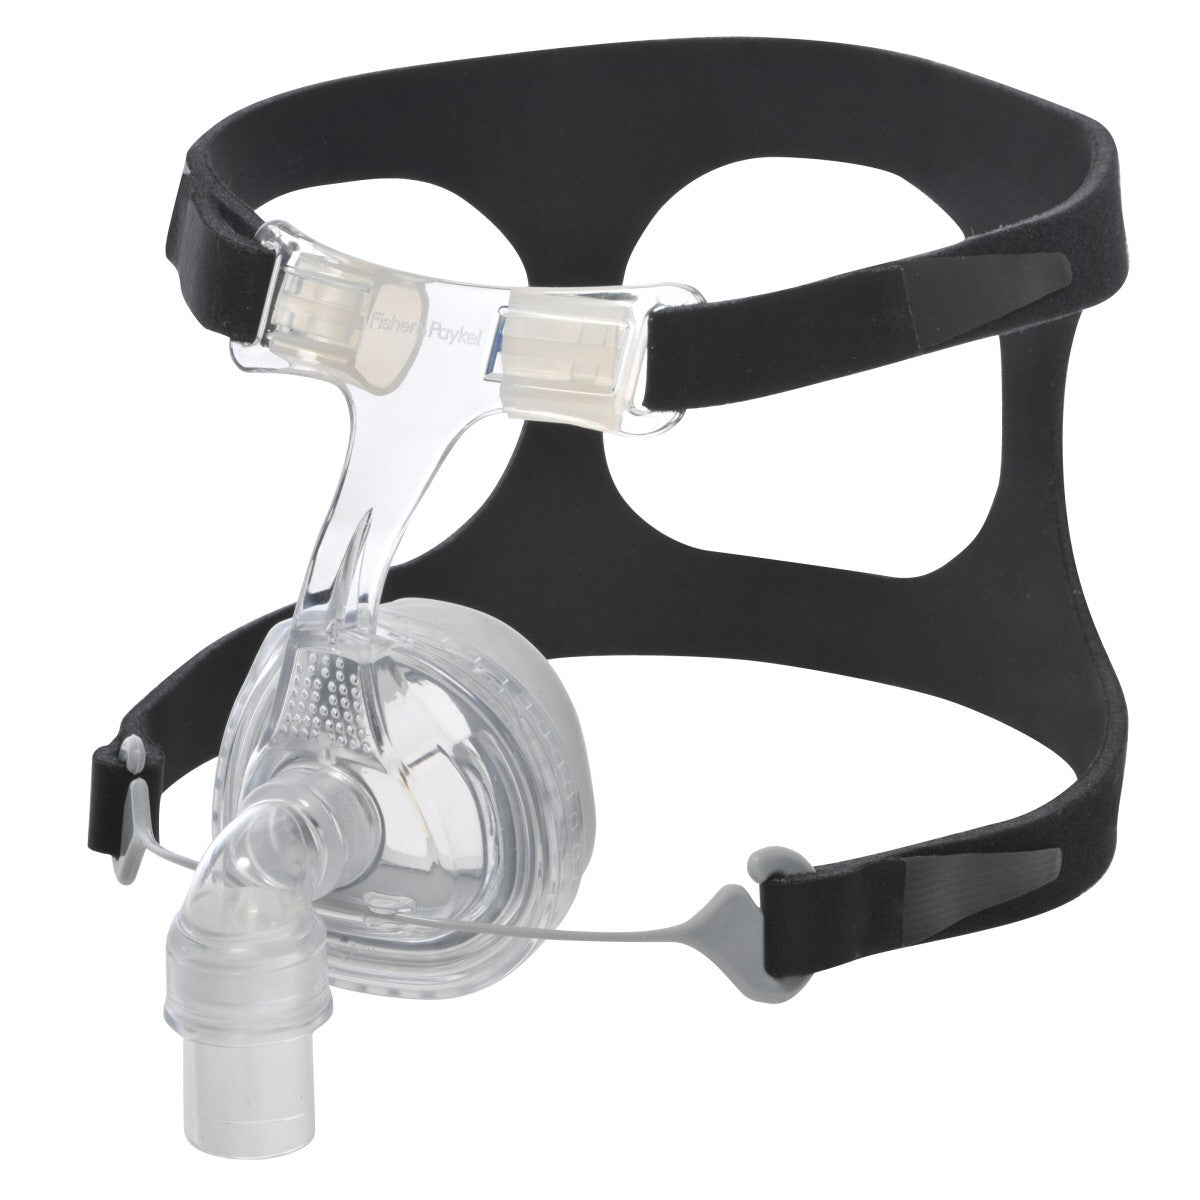 Fisher and Paykel Zest Q Nasal Mask